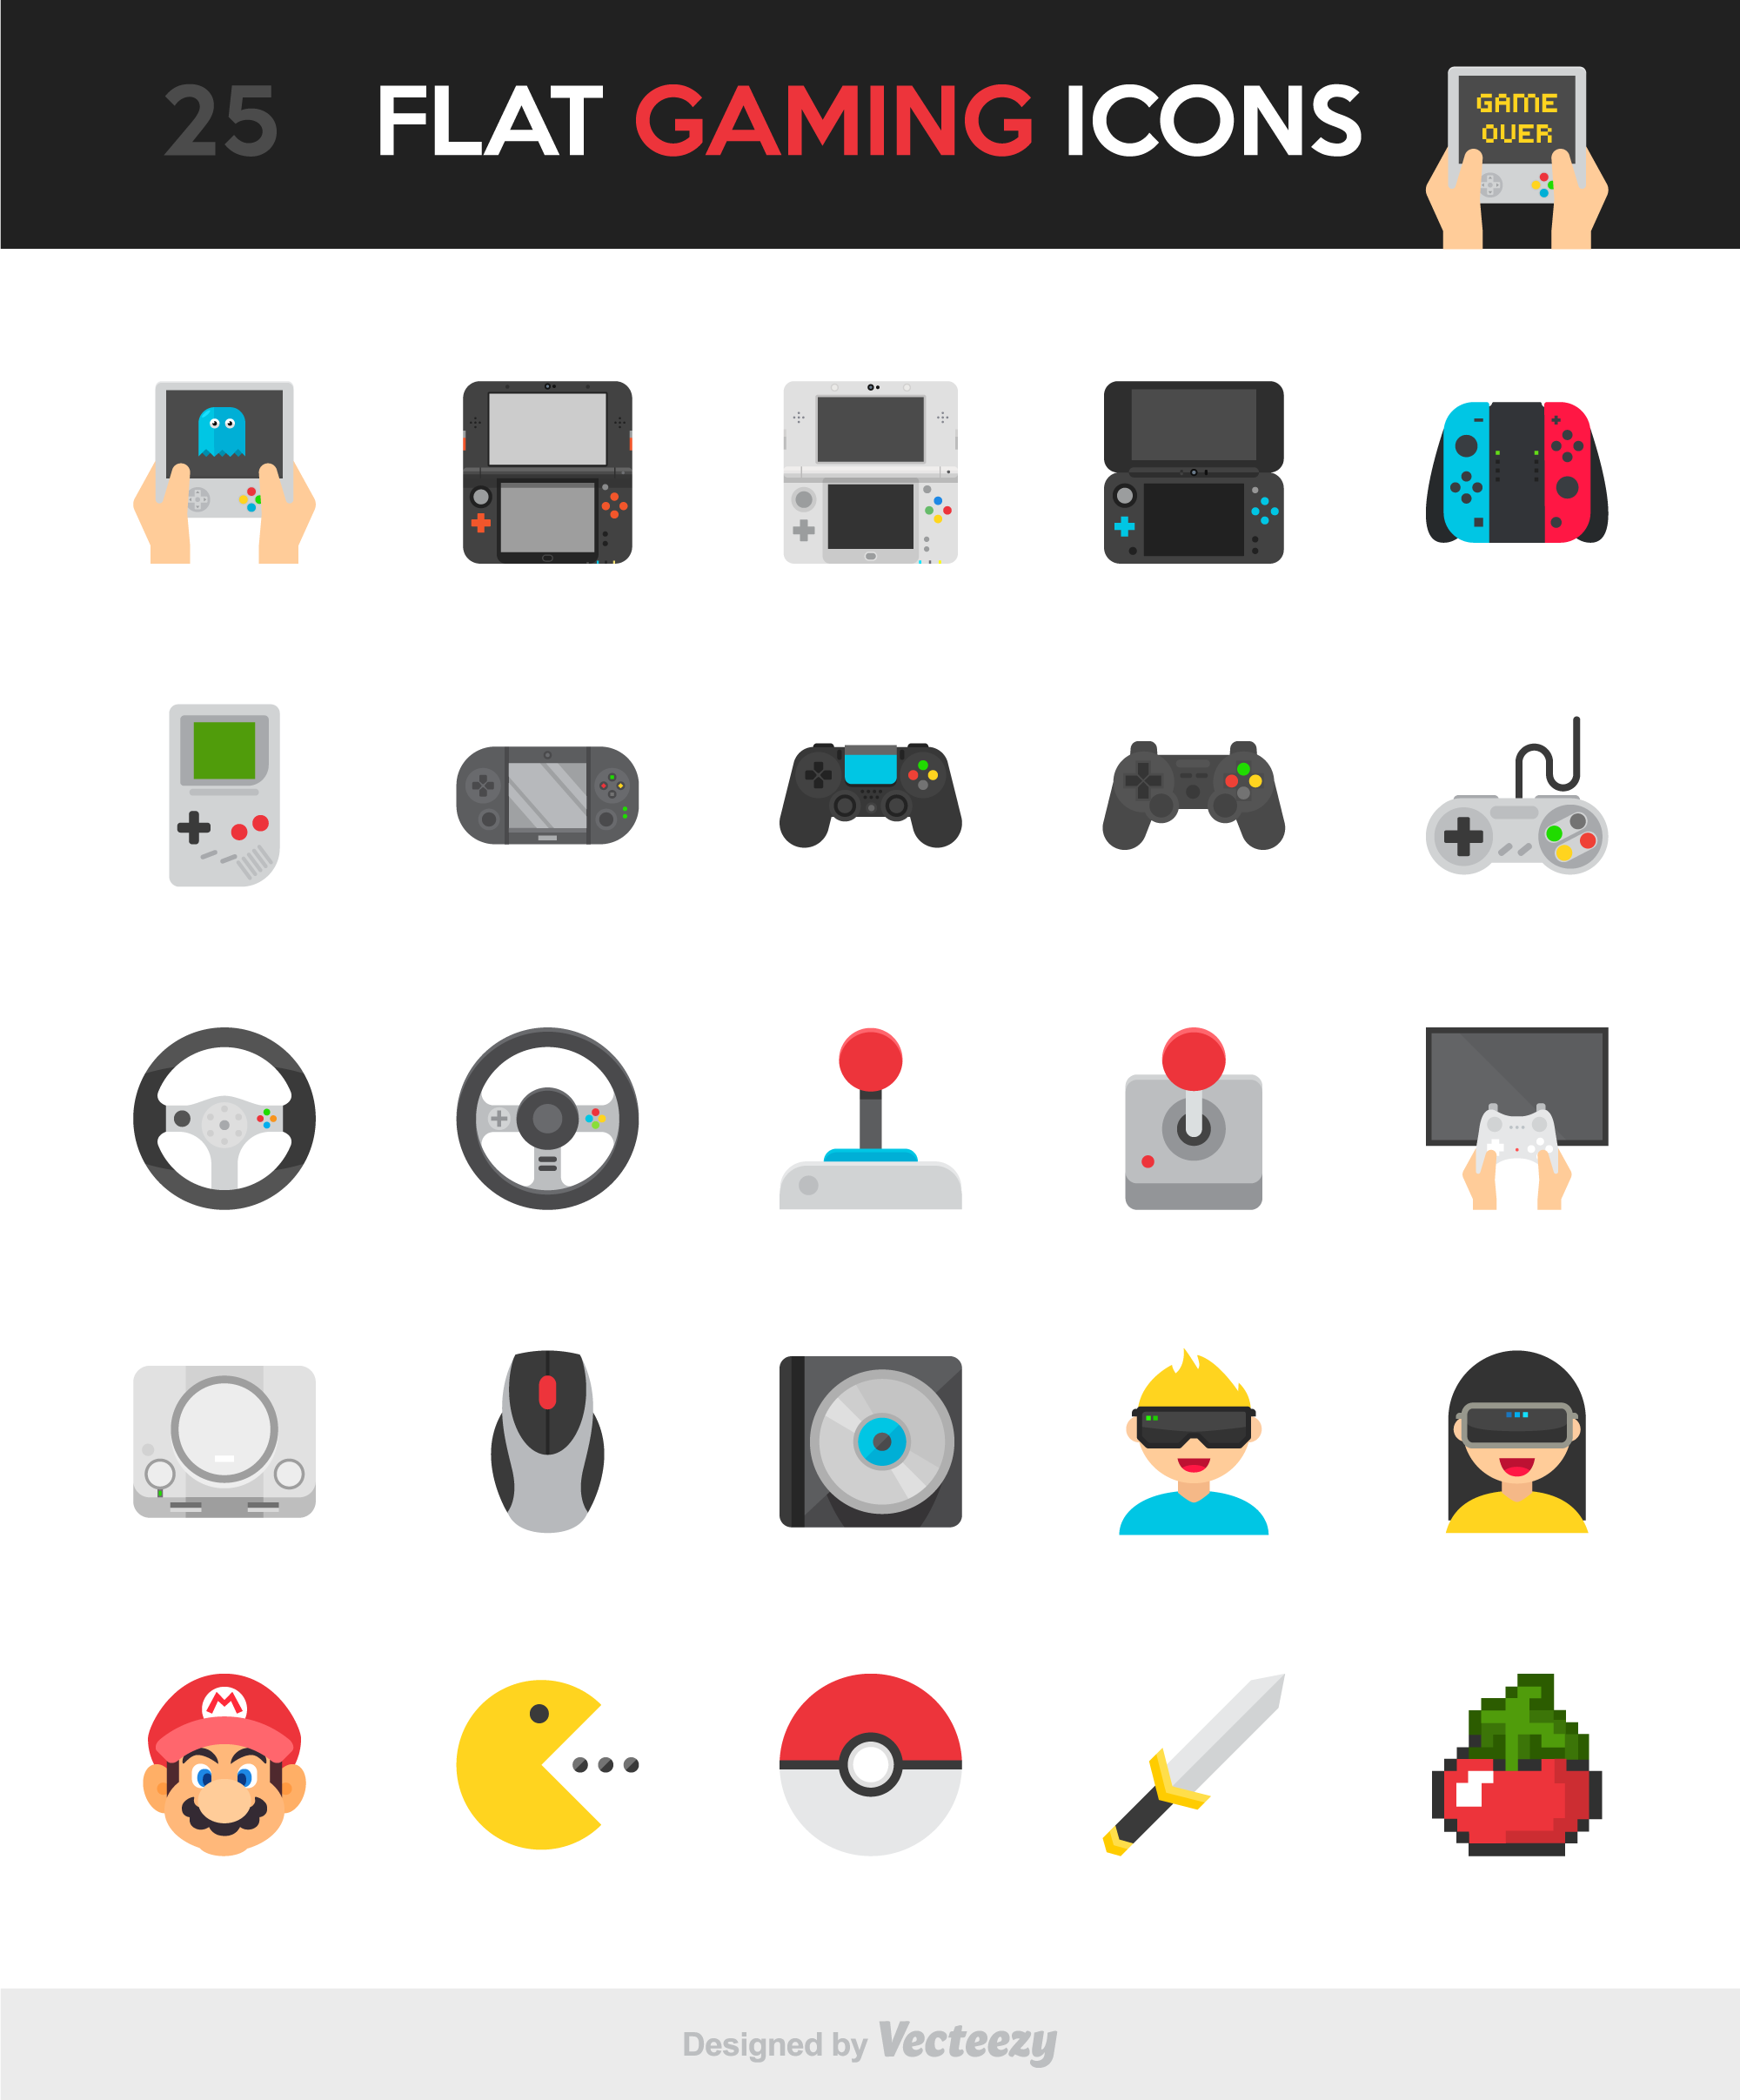 Free Game Icons